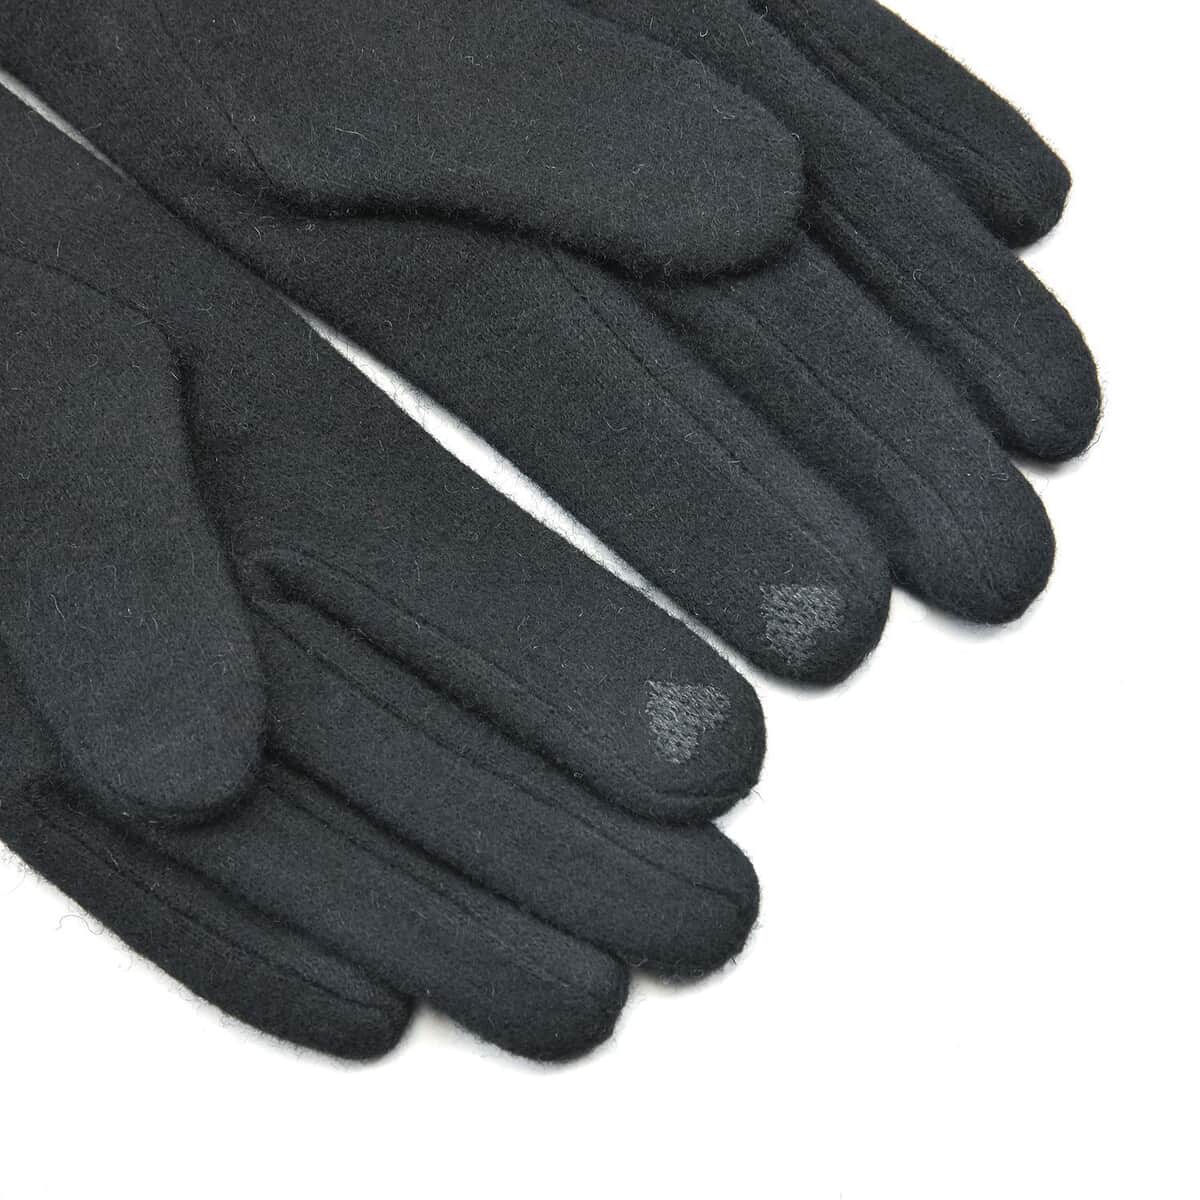 Black Cashmere Warm Gloves with Bowknot and Equipped Touch Screen Friendly image number 3